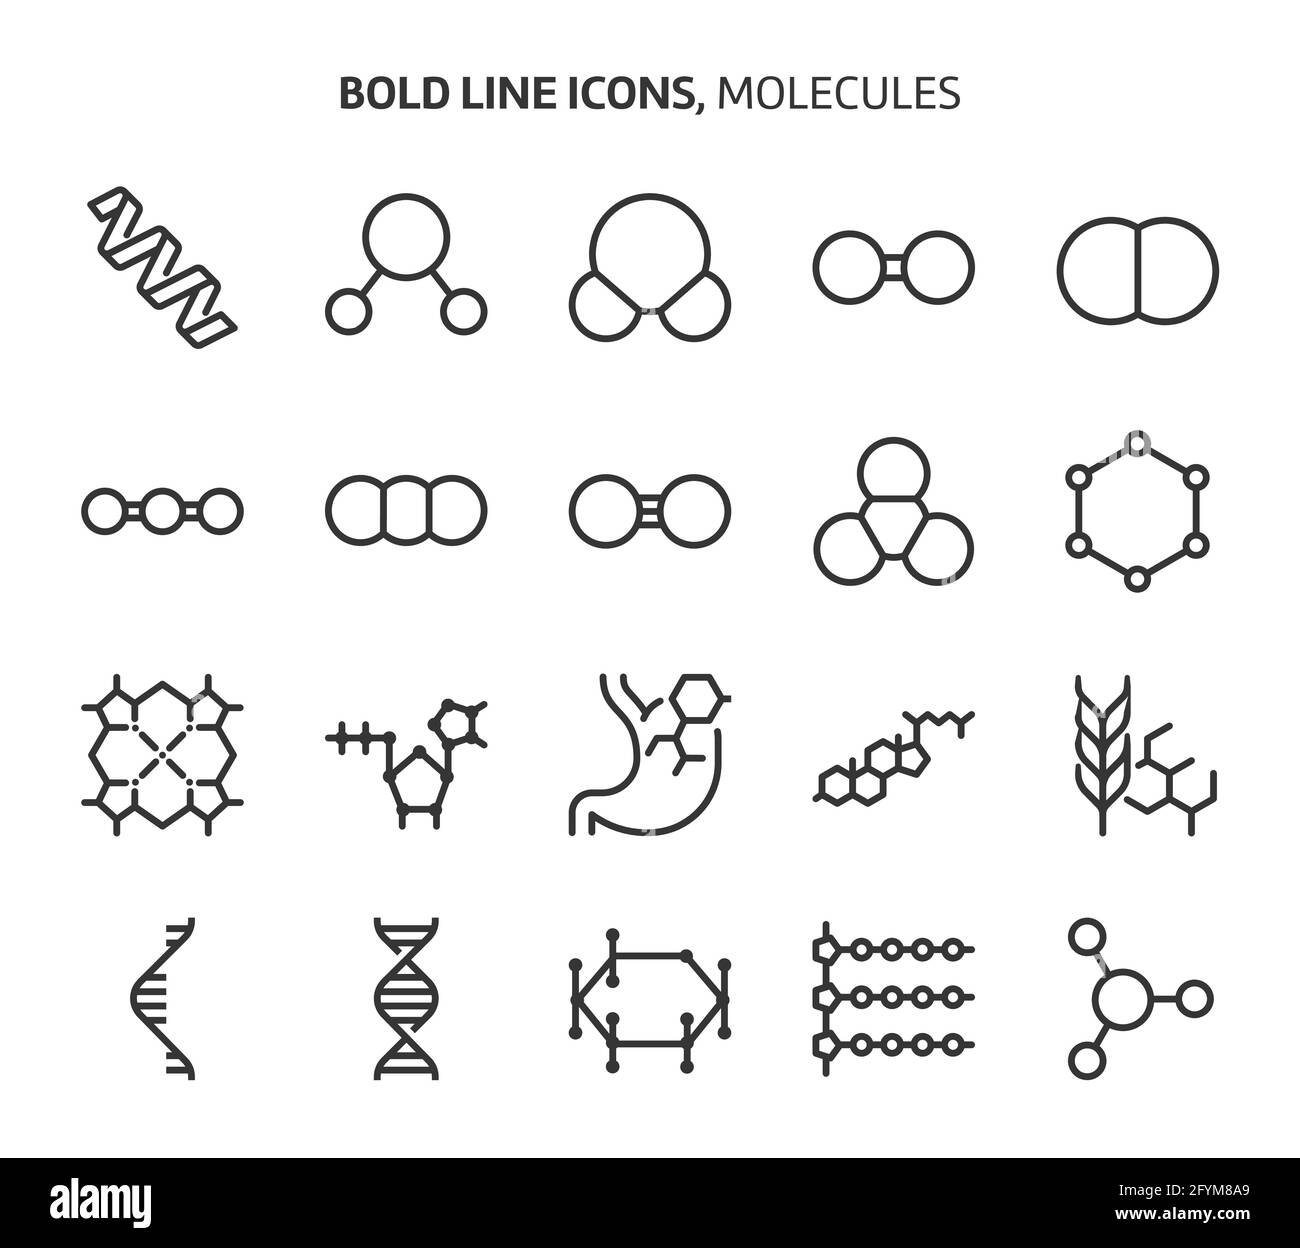 Molecules, bold line icons. The illustrations are a vector, editable stroke, 48x48 pixel perfect files. Crafted with precision and eye for quality. Stock Vector